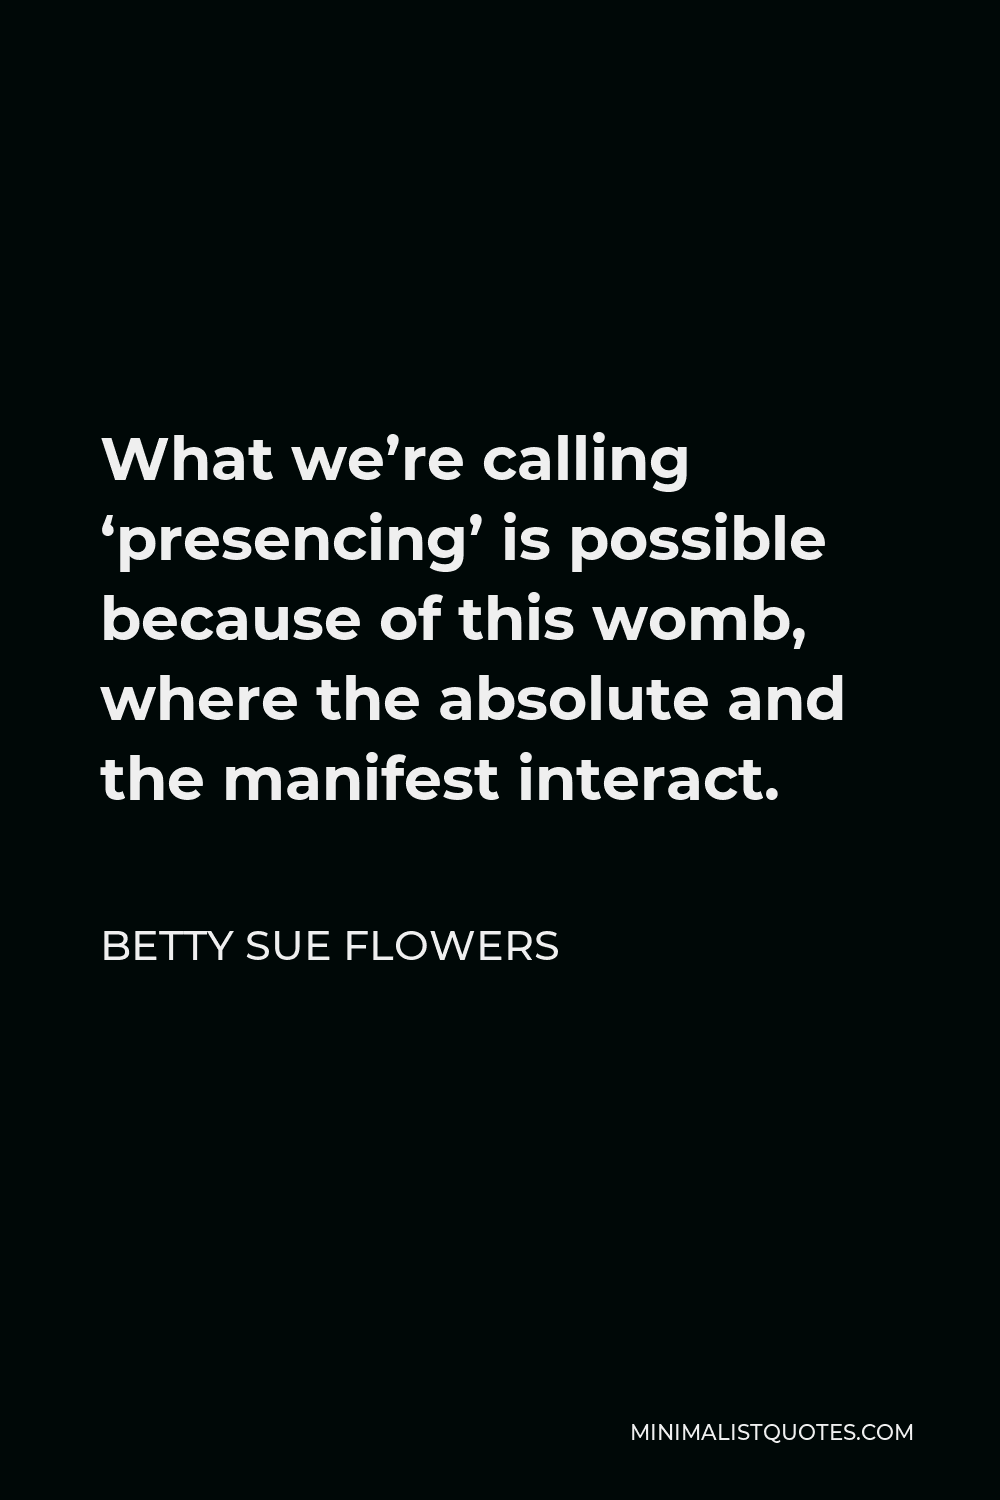 Betty Sue Flowers Quote - What we’re calling ‘presencing’ is possible because of this womb, where the absolute and the manifest interact.